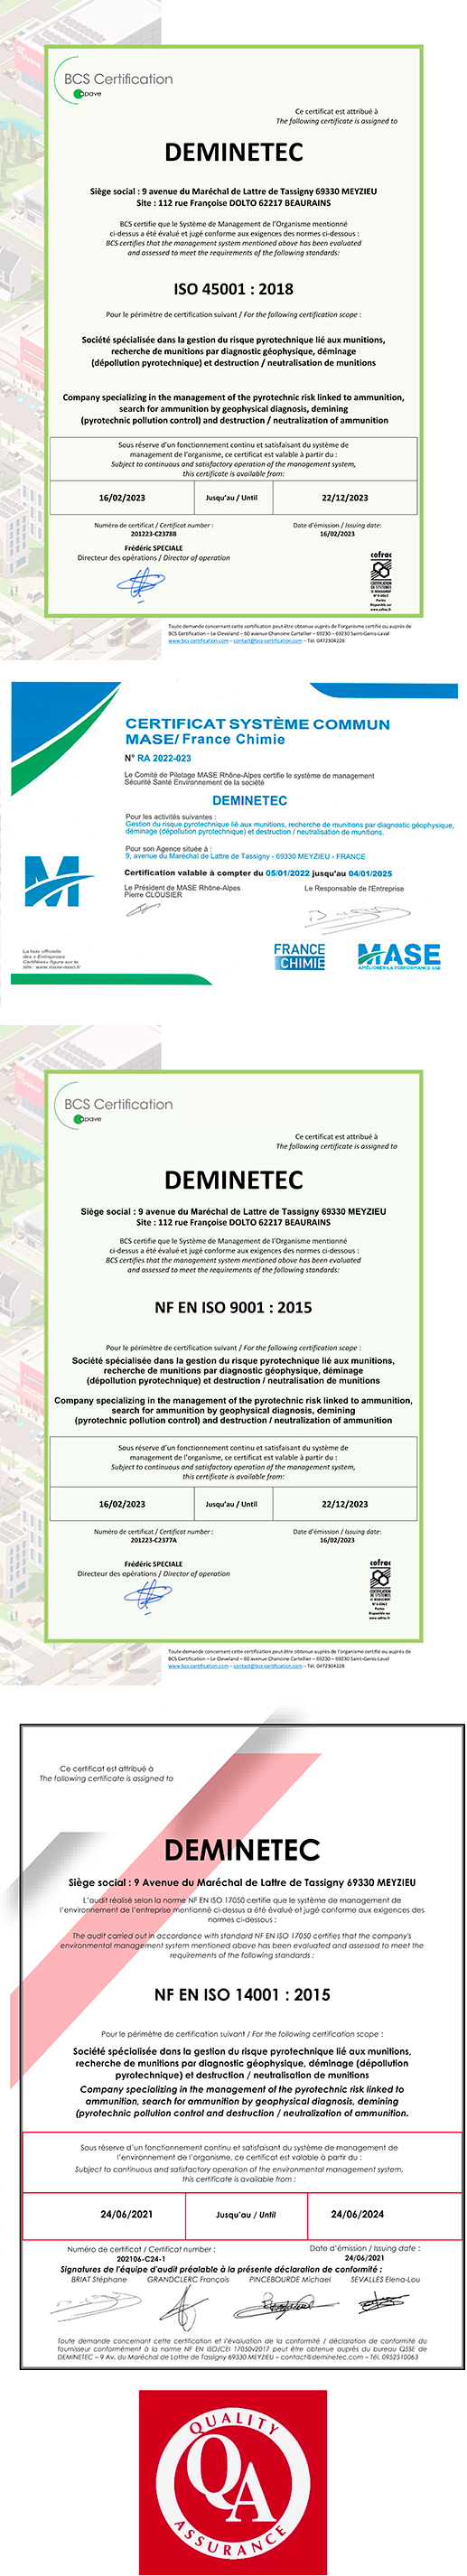 DEMINETEC Quality assurance and control